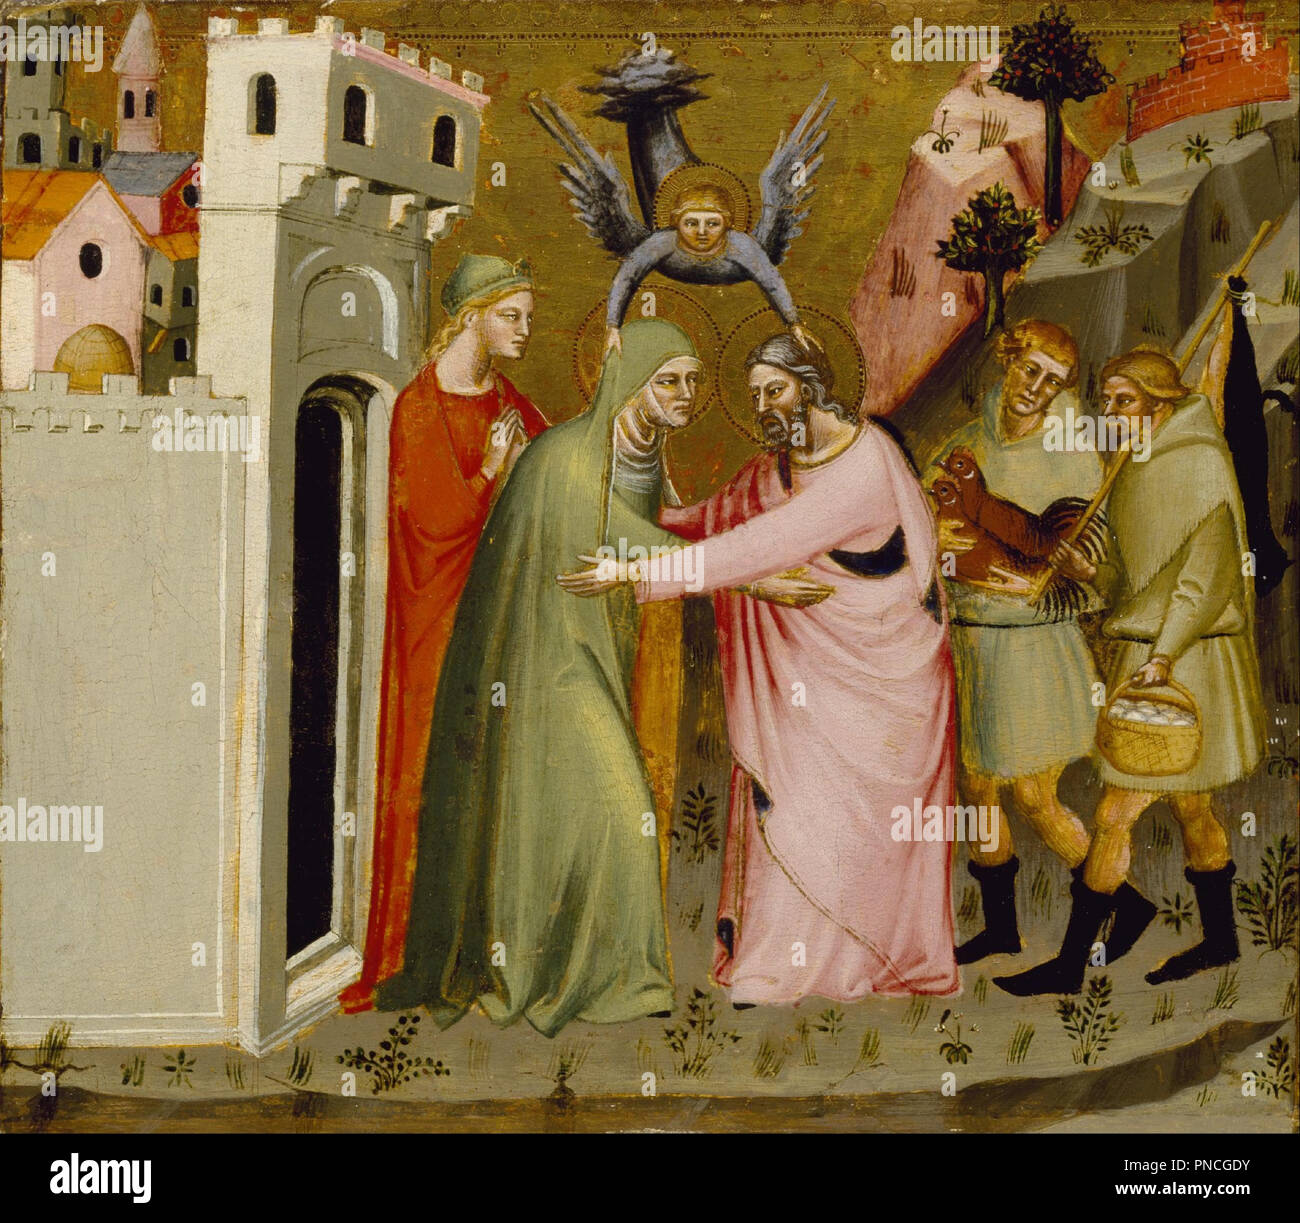 The Meeting of Anna and Joachim at the Golden Gate. Date/Period: 1370/1390. Painting. Tempera and gold leaf on wood. Width: 34.8 cm. Height: 30.2 cm (without frame). Author: Master of the Golden Gate. Stock Photo